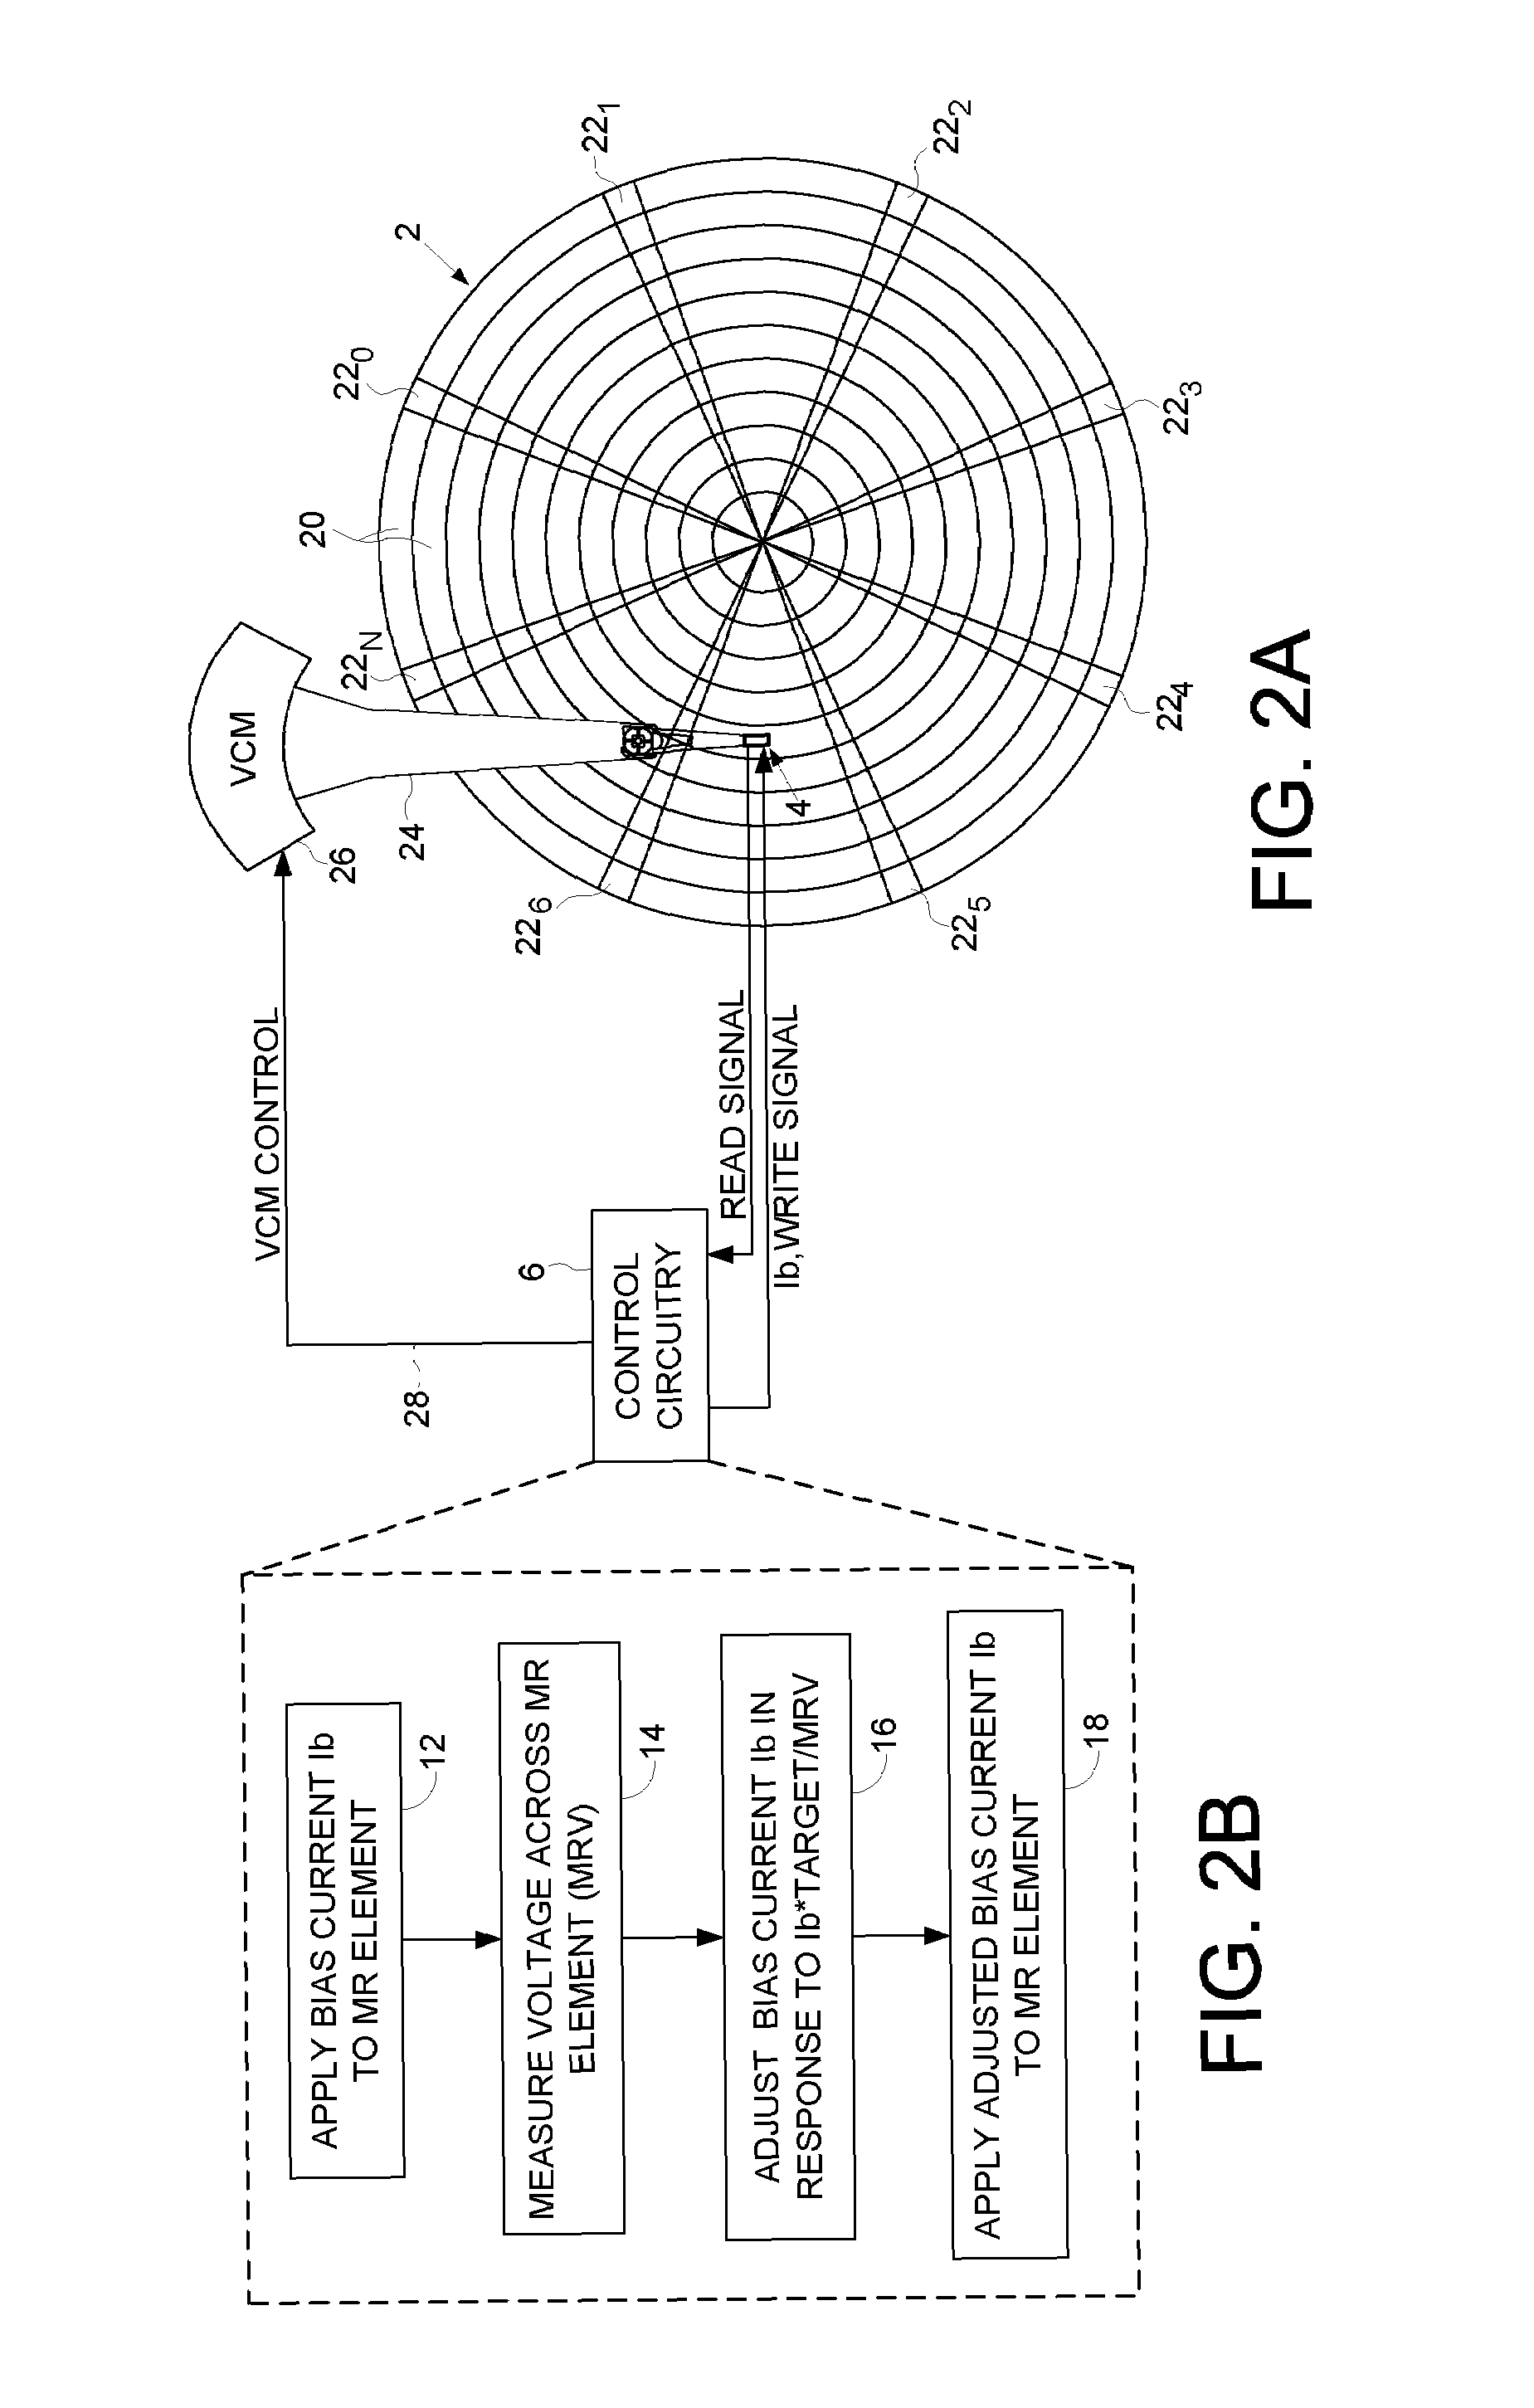 Setting an operating bias current for a magnetoresistive head using ratio of target voltage and measured voltage